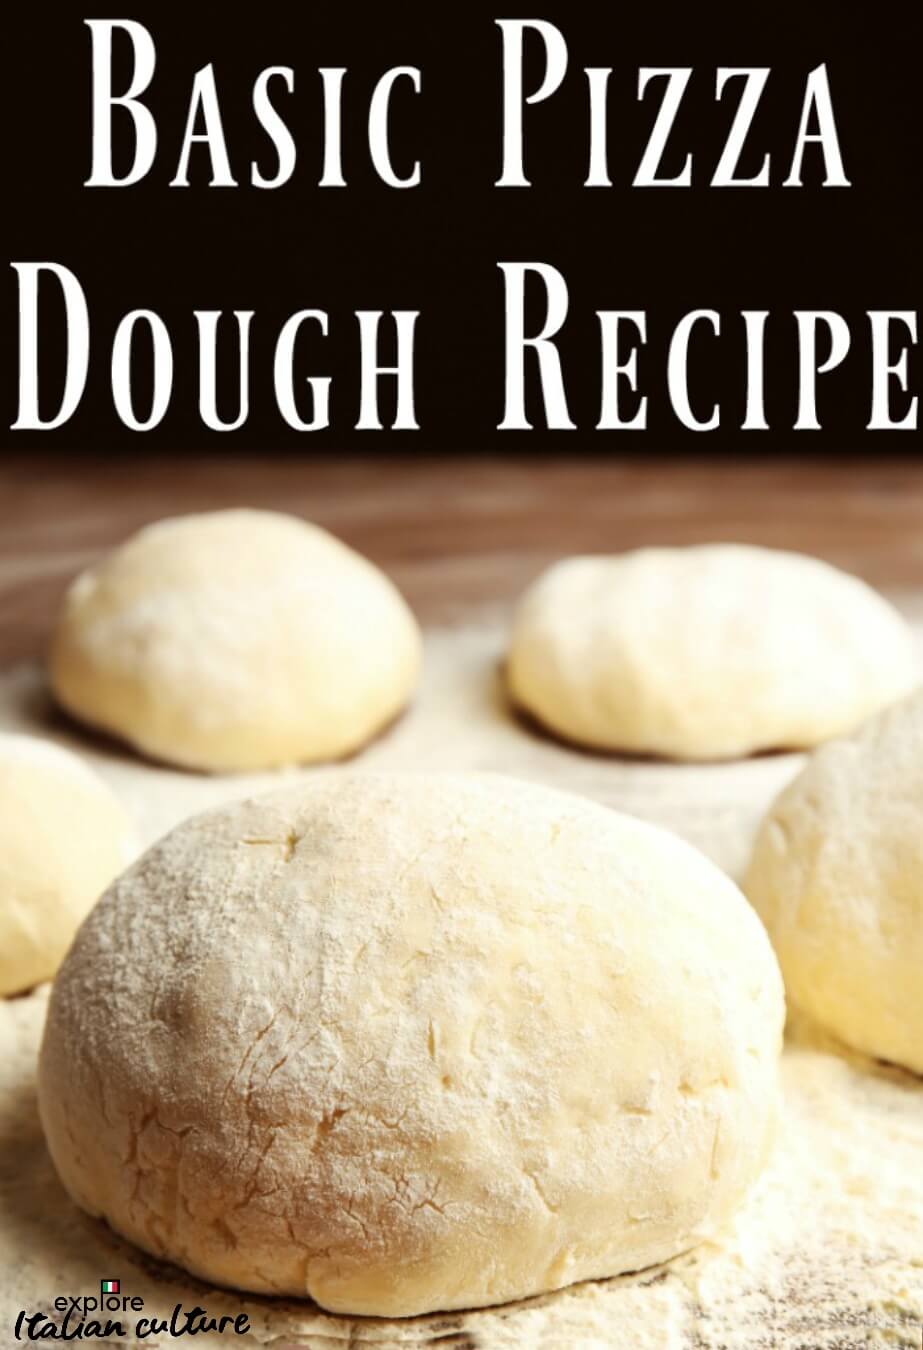 Basic pizza dough recipe - pin for later.